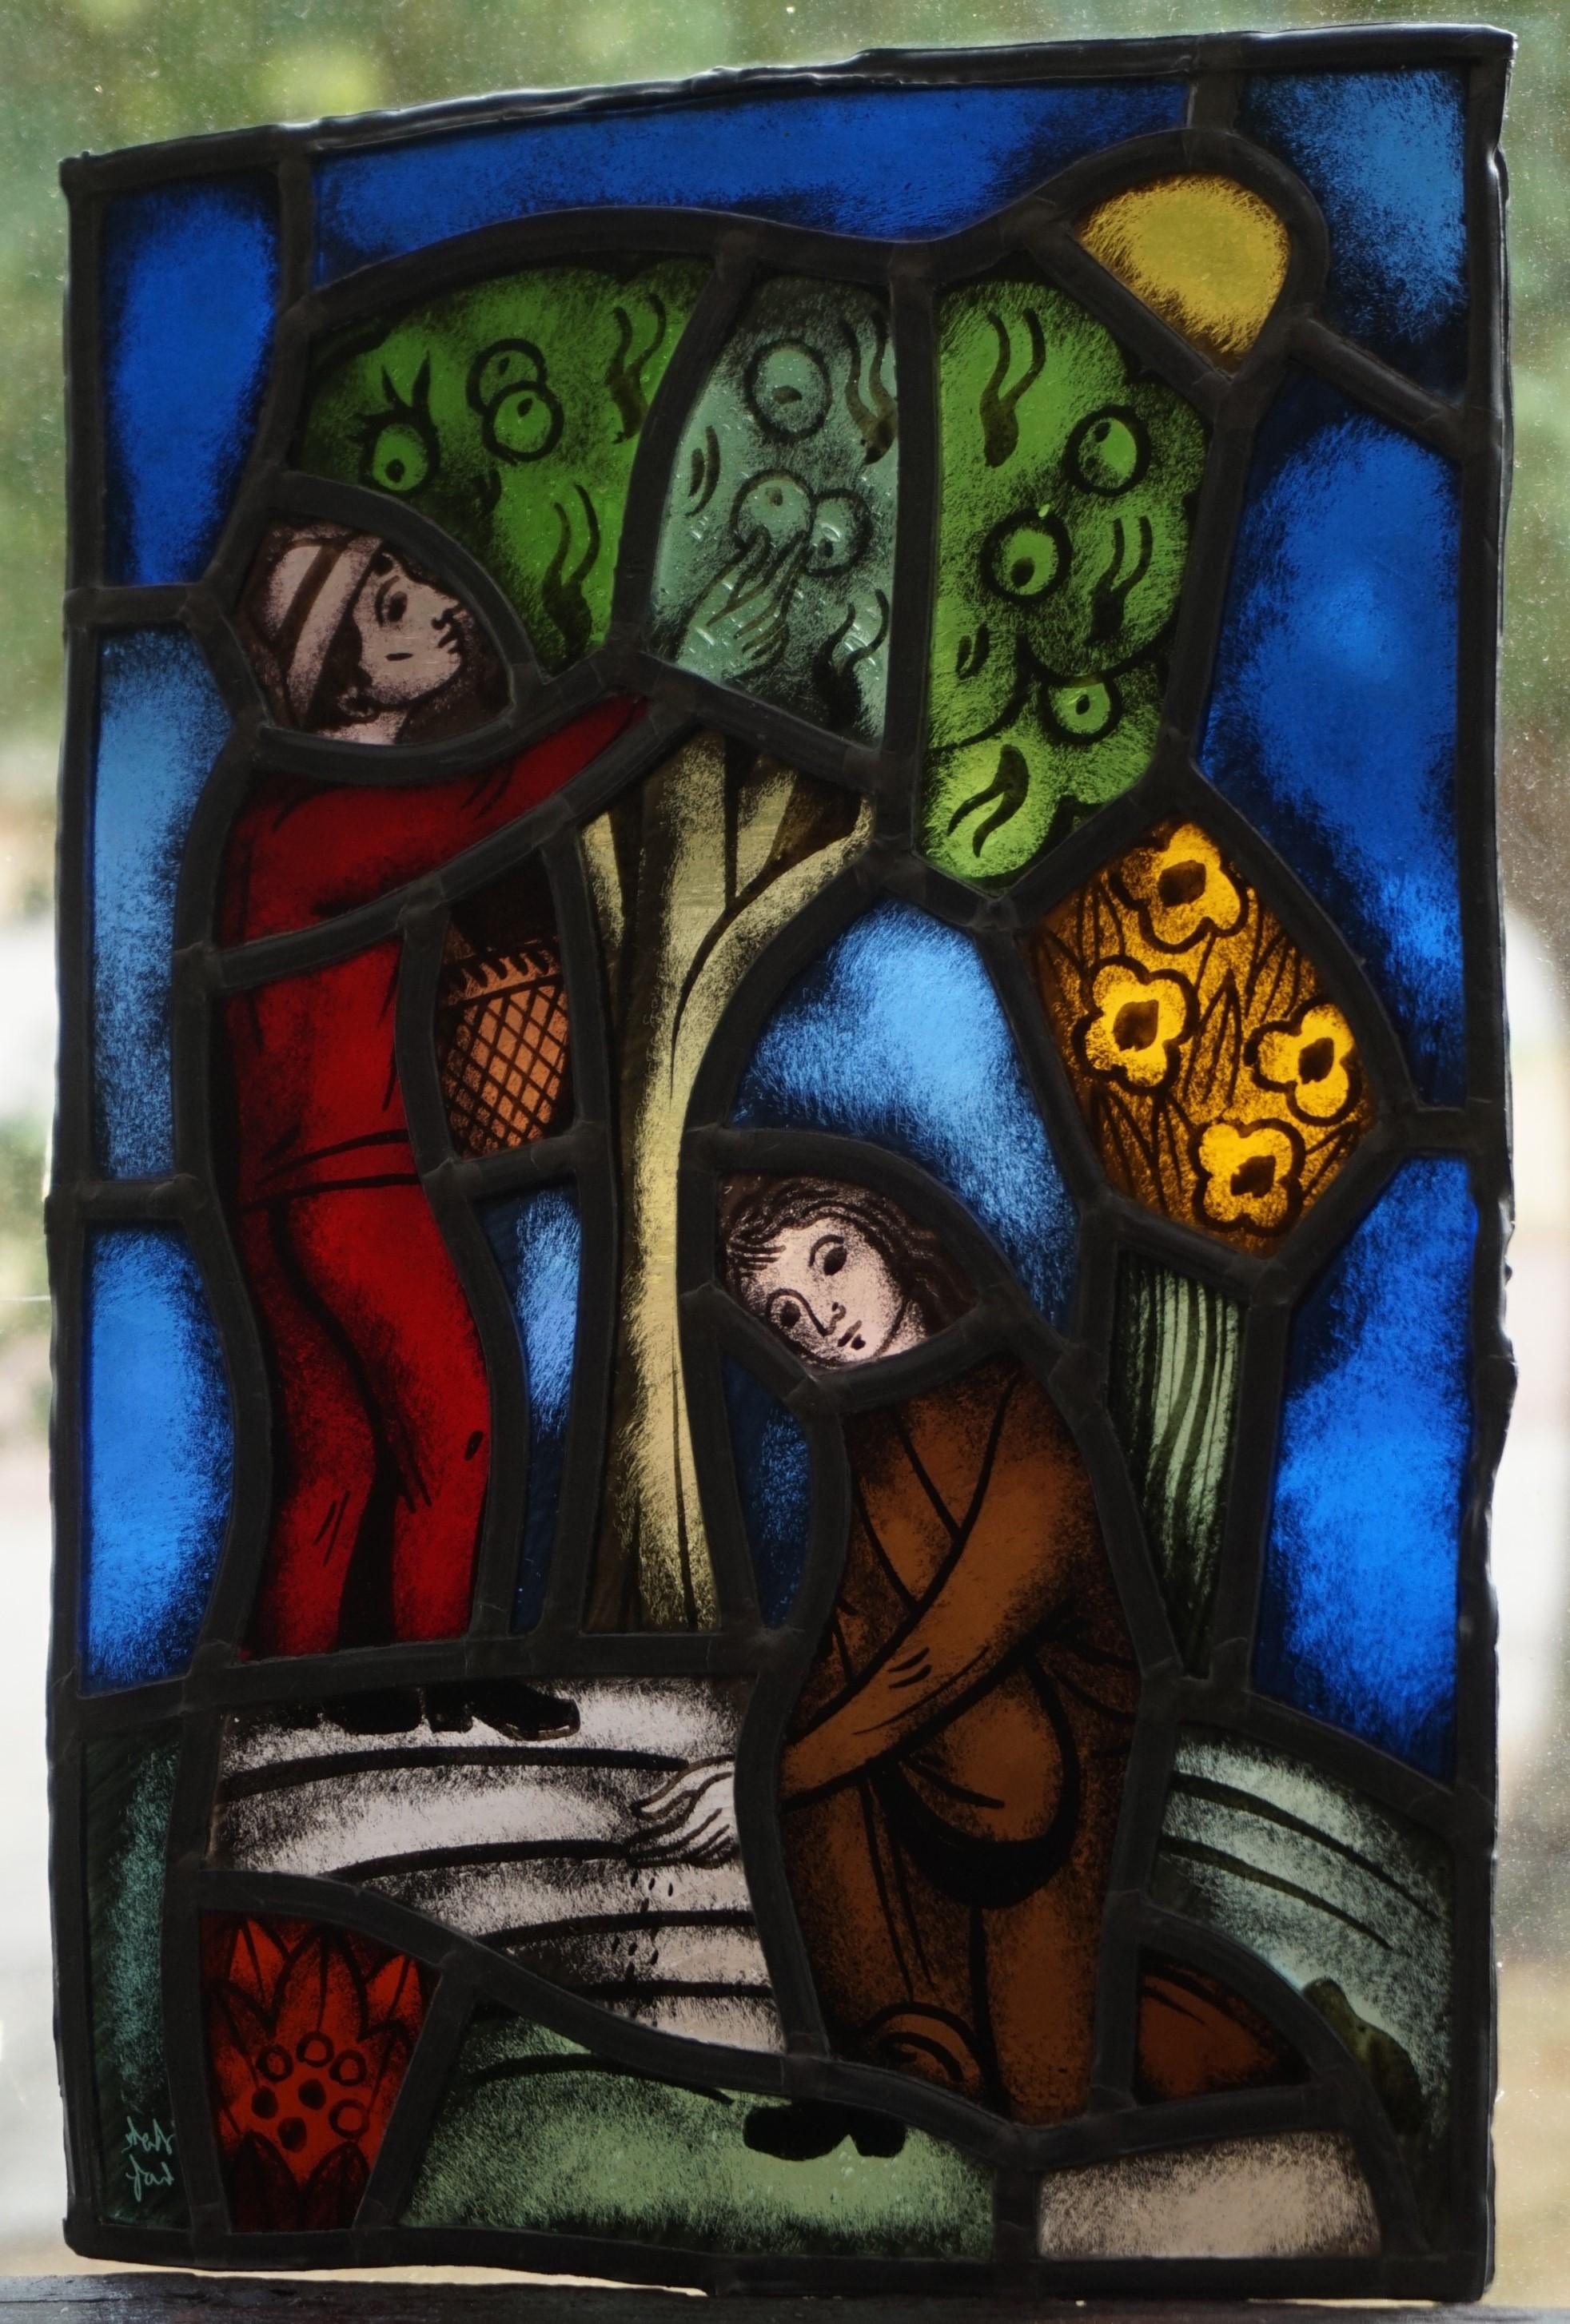 20th Century Biblical 'You Reap What You Sow' Leaded & Stained Glass Panel by Abraham Stokhof